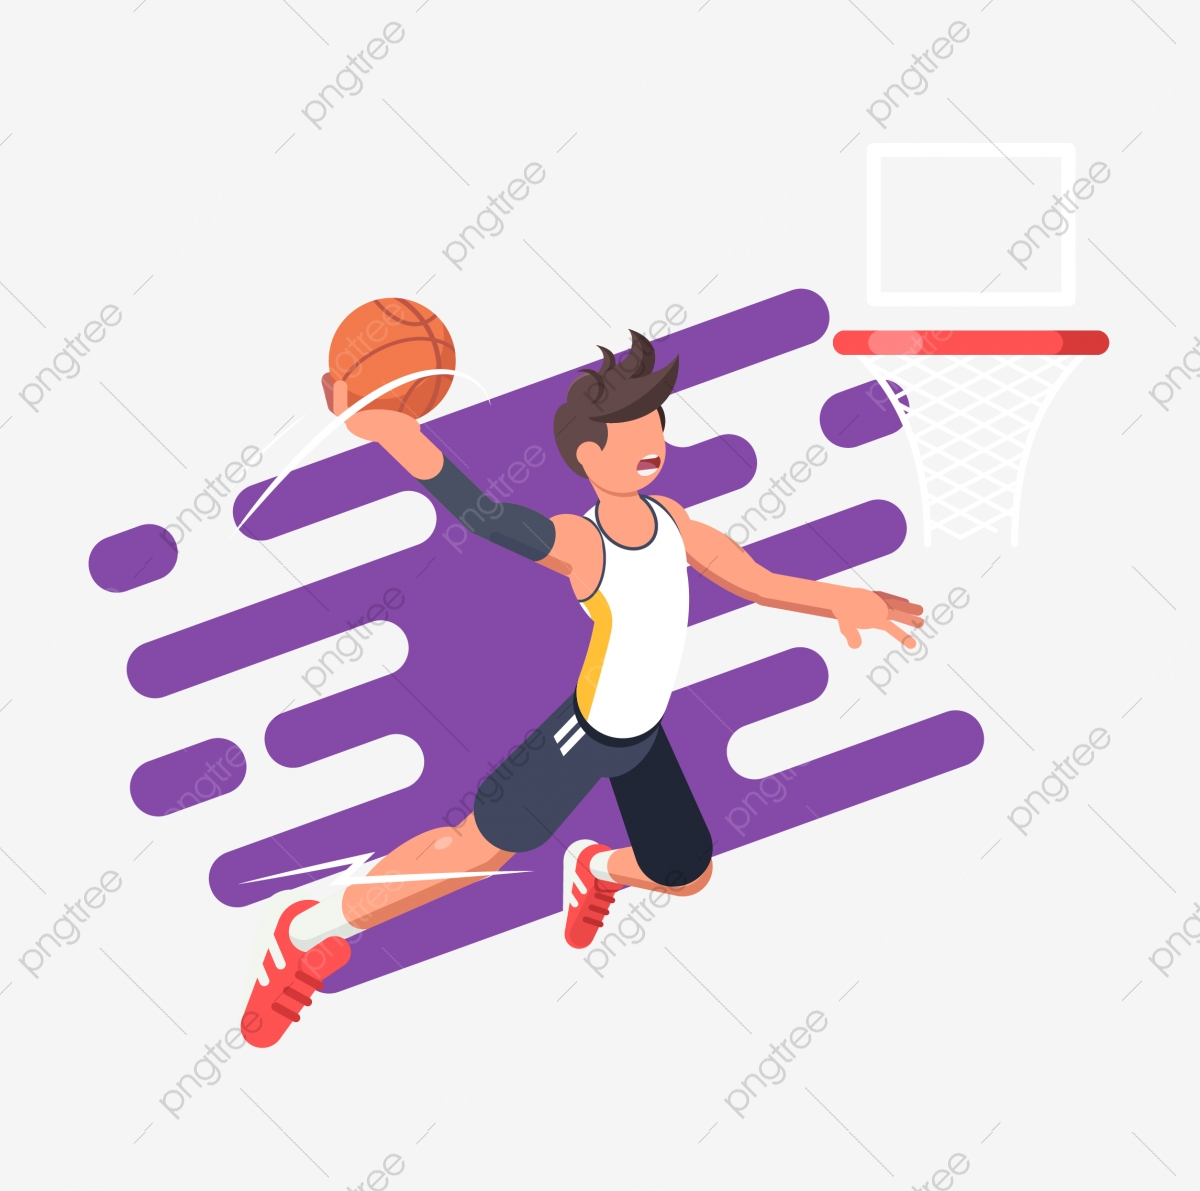 Sports clipart file. Athletes track and field